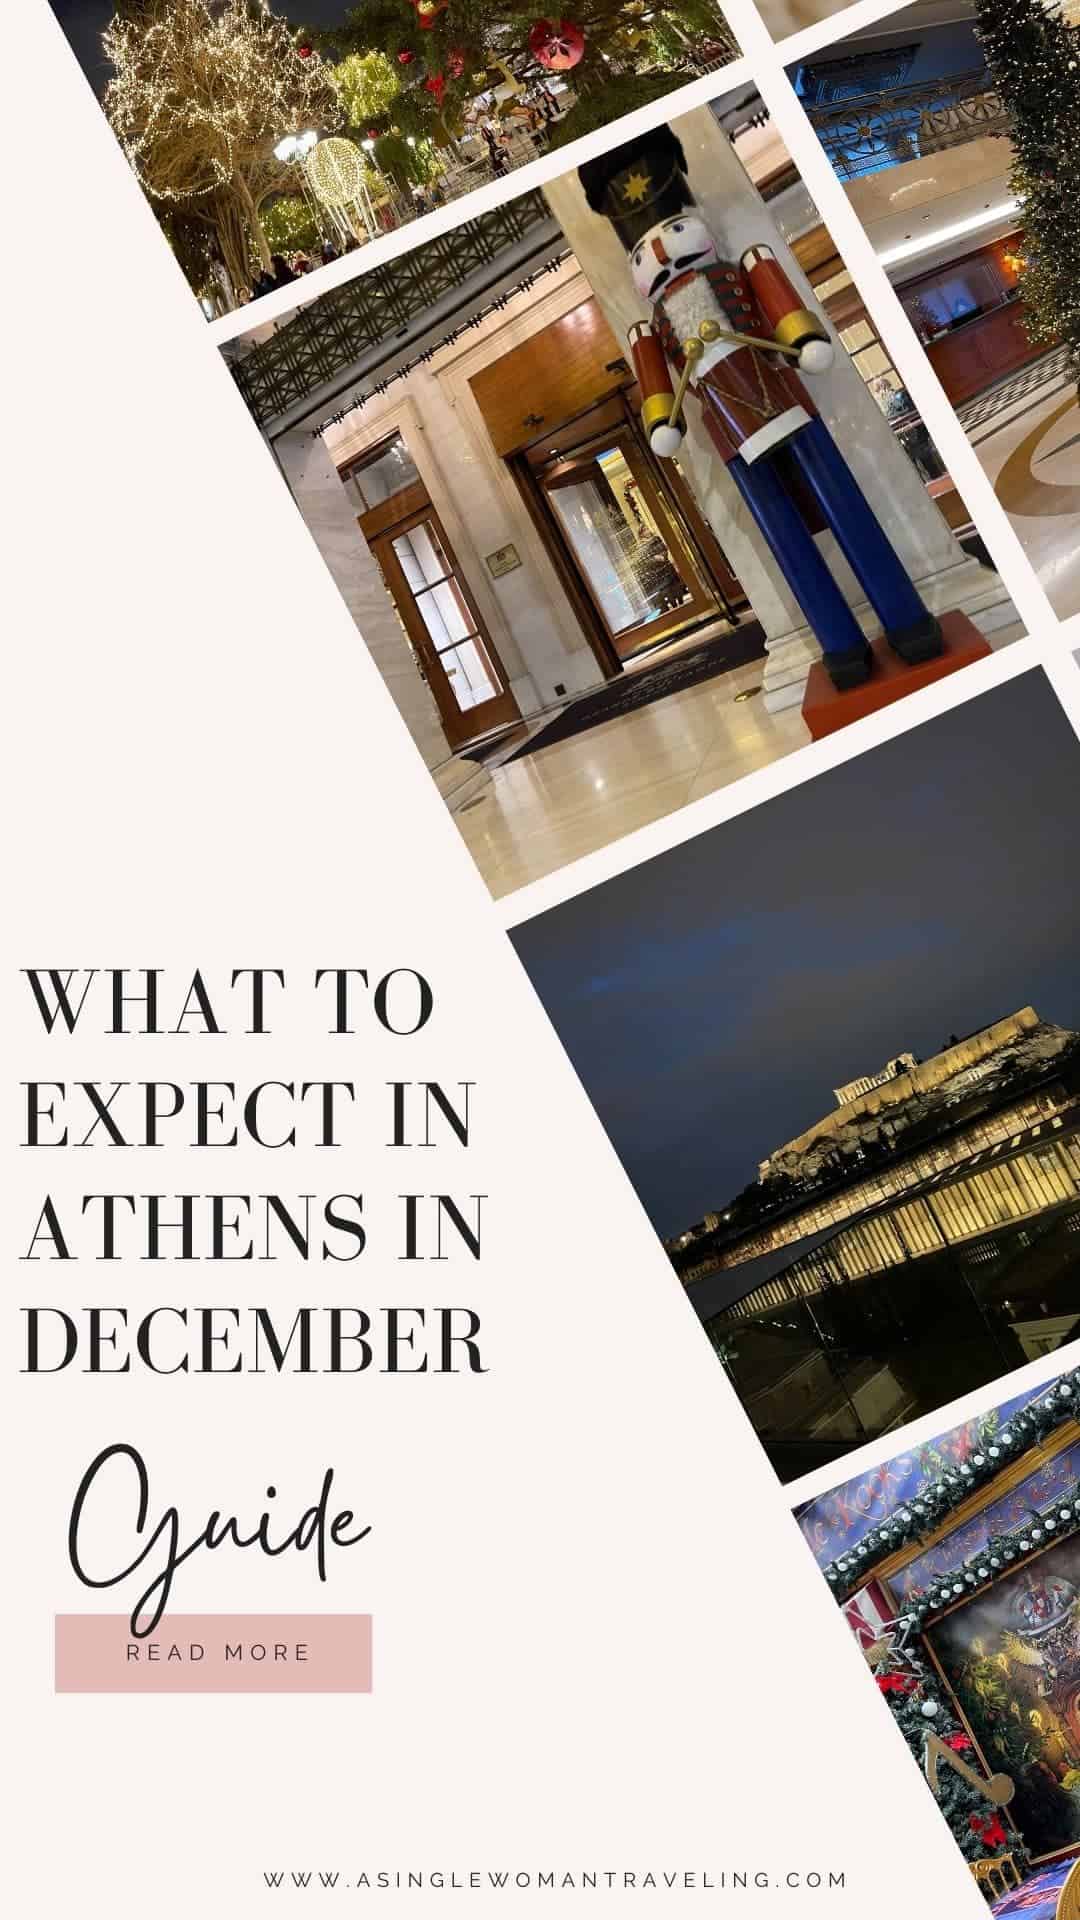 Another Pinterest pin for images for Athens in December